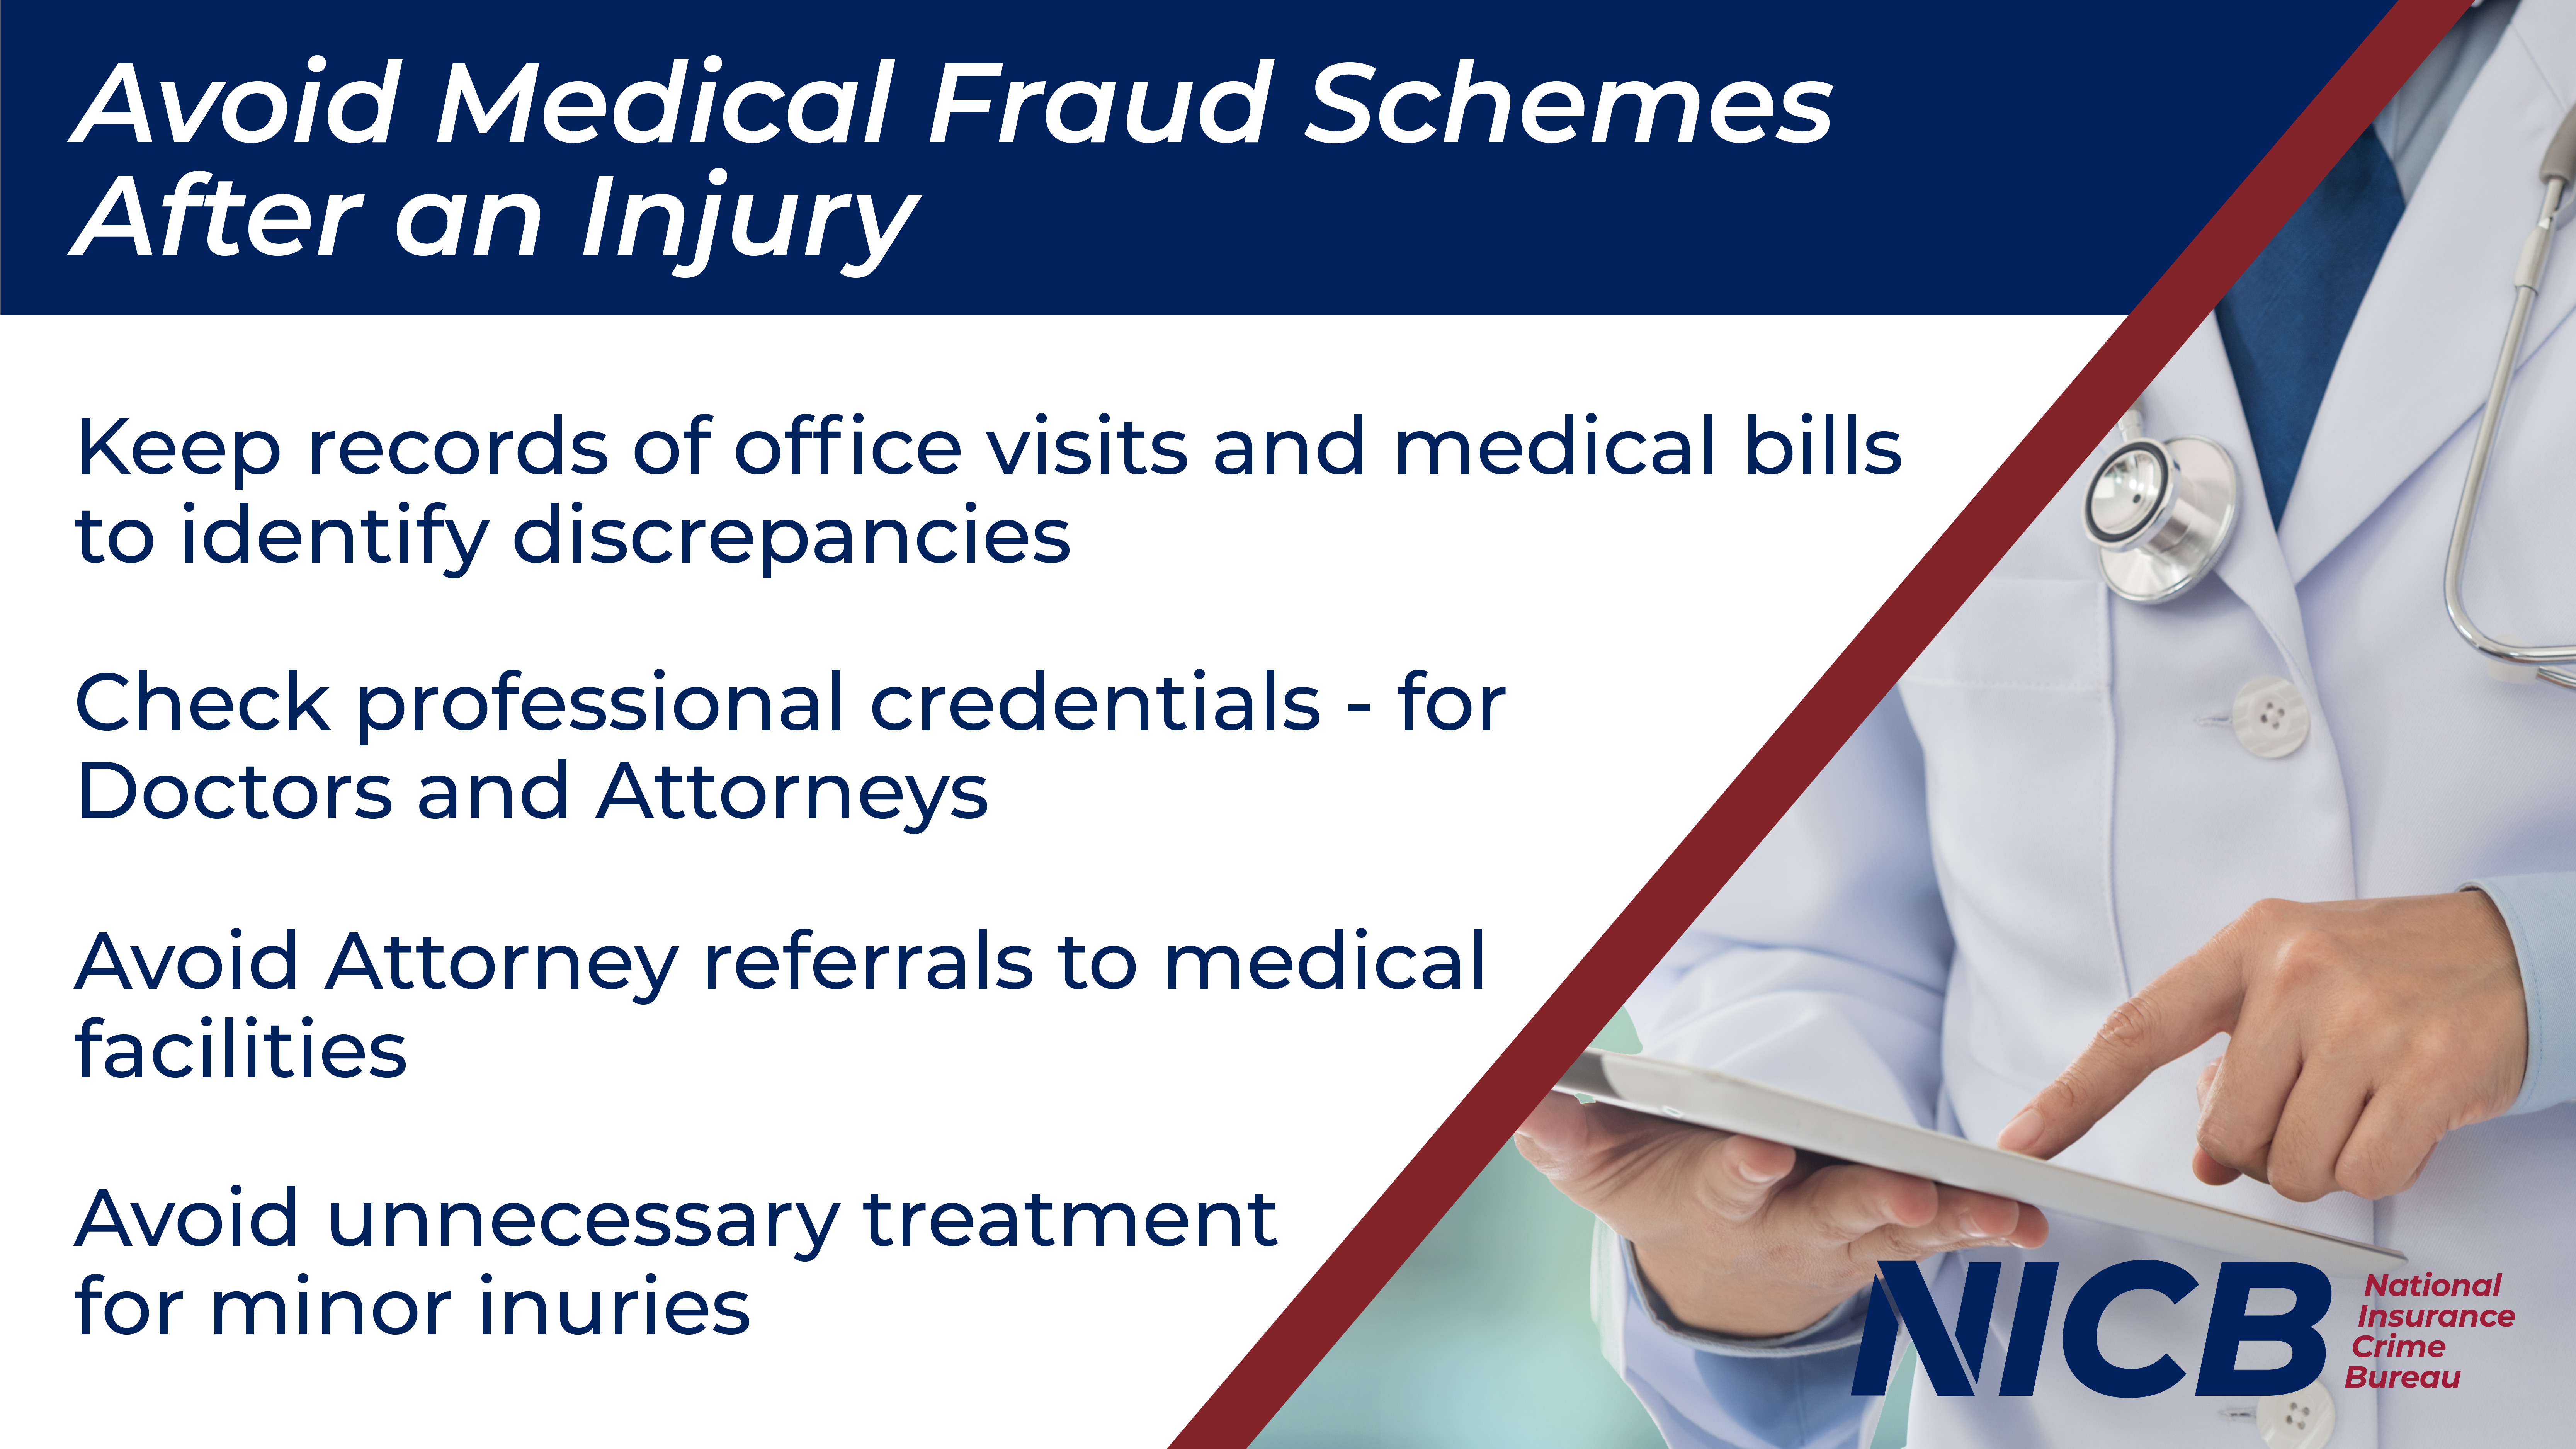 Avoid Medical Fraud Schemes After an Injury